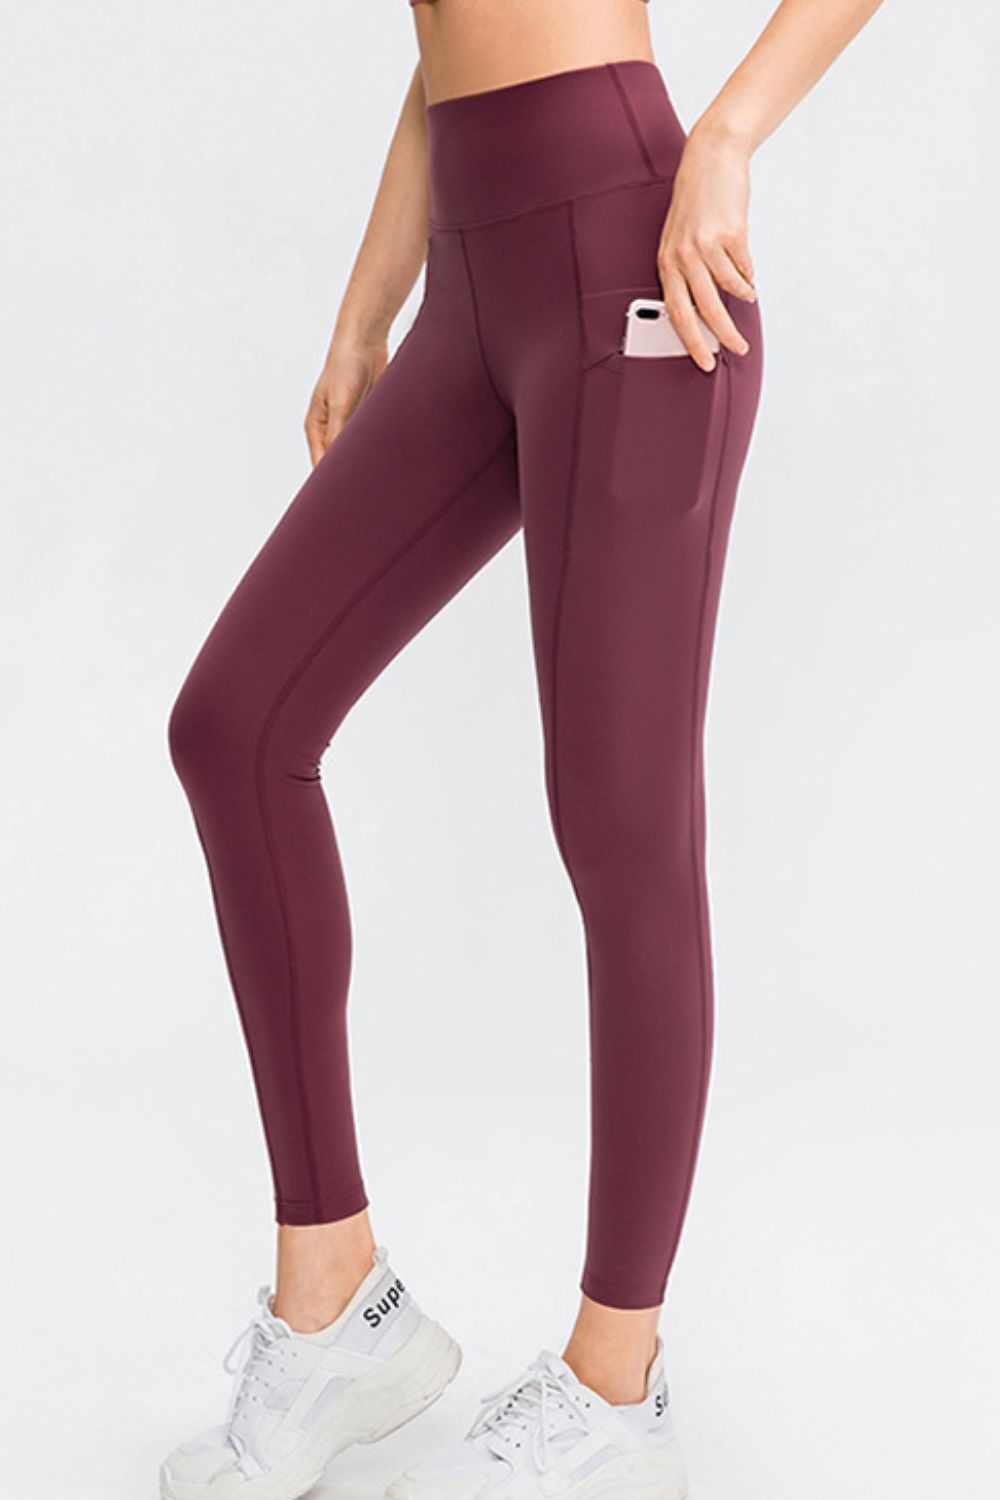 Wide Waistband Slim Fit Long Sports Pants with Pocket - Leggings - FITGGINS